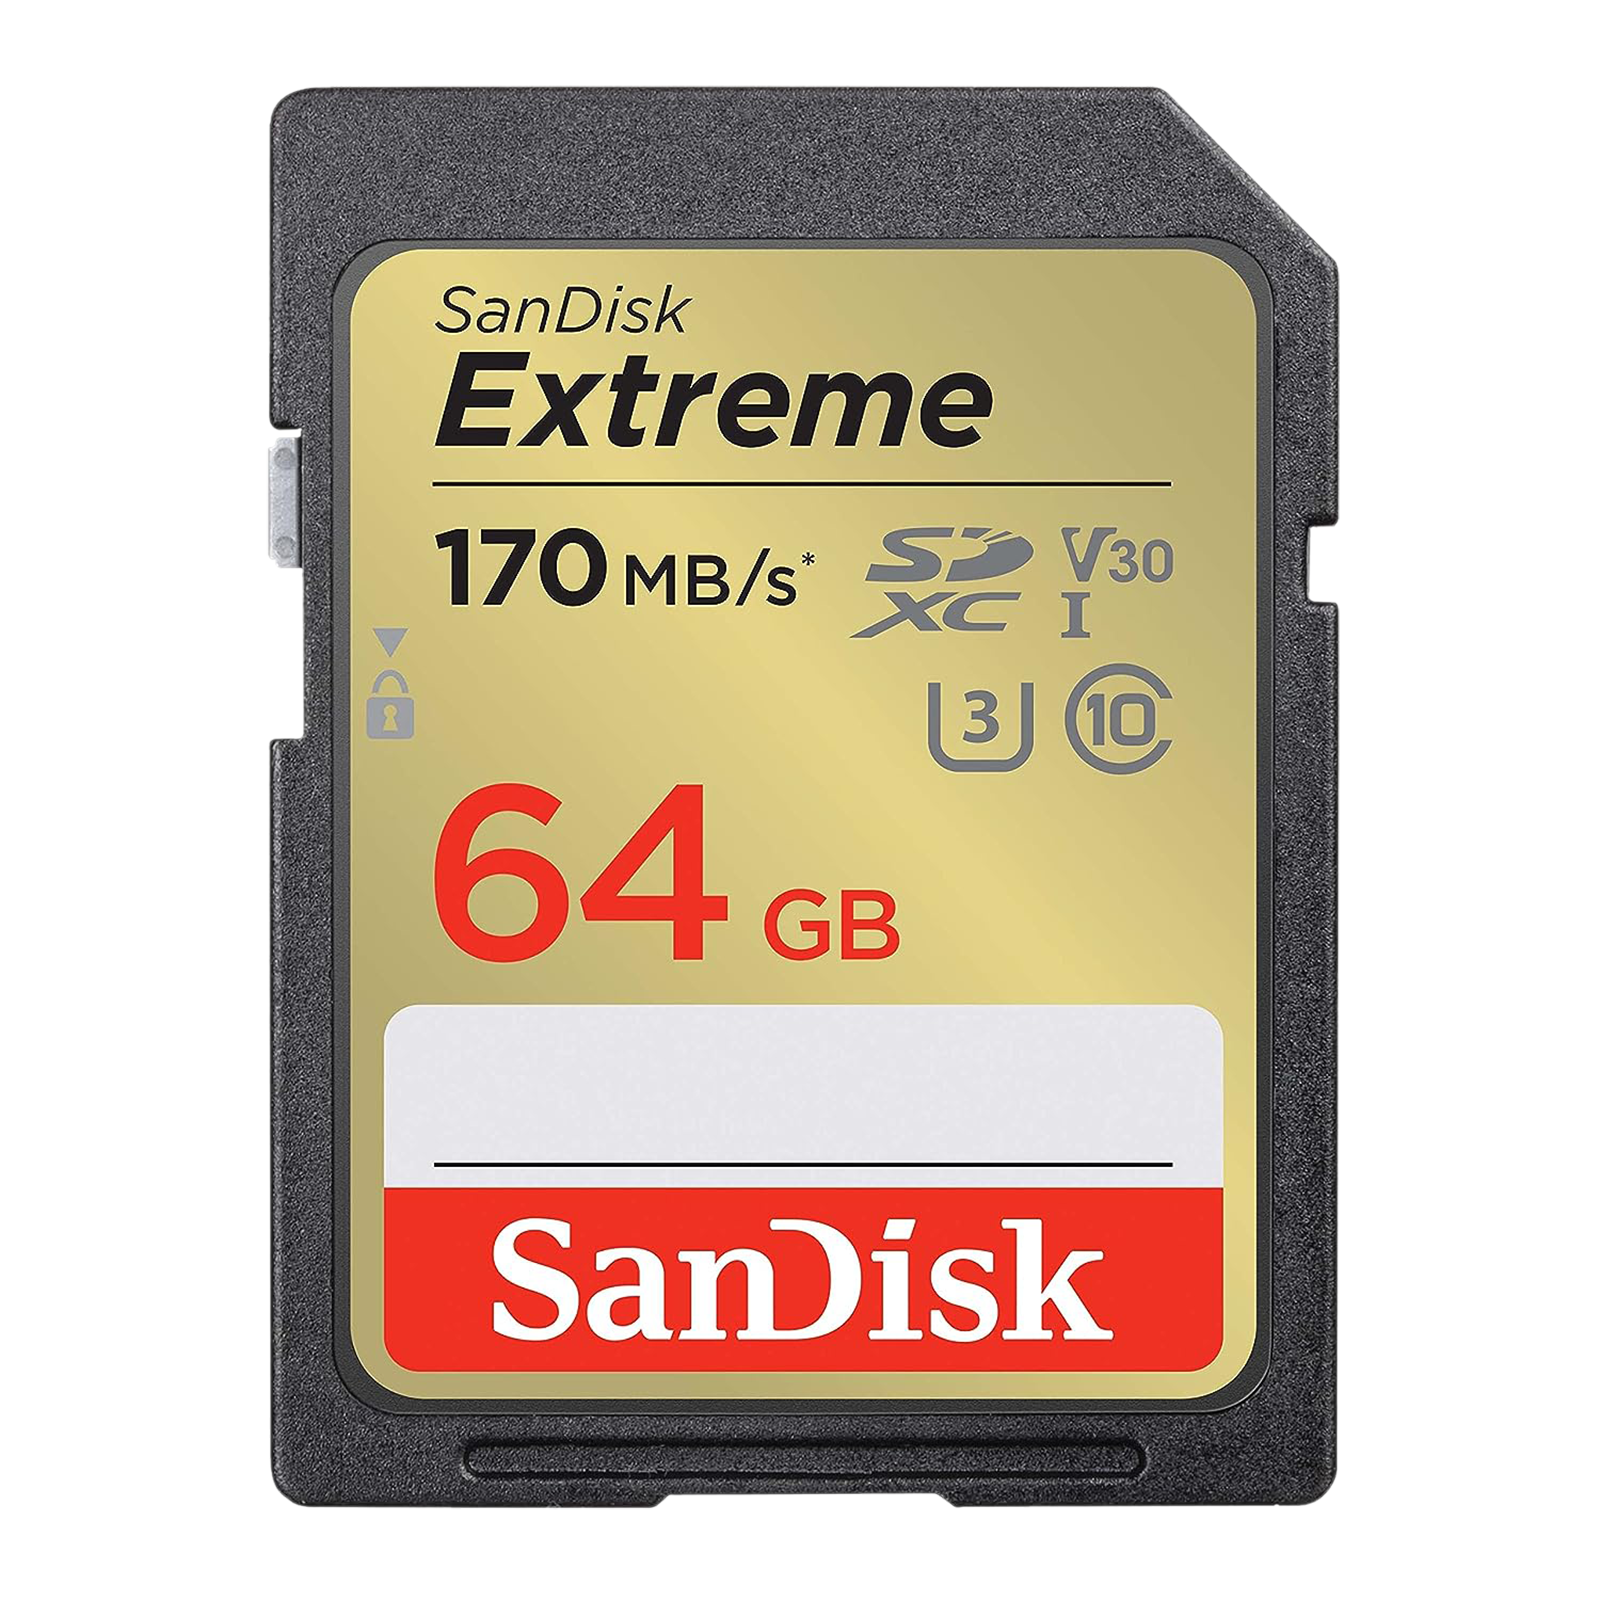 SanDisk Extreme SDXC 64GB Class 10 170MB/s Memory Card